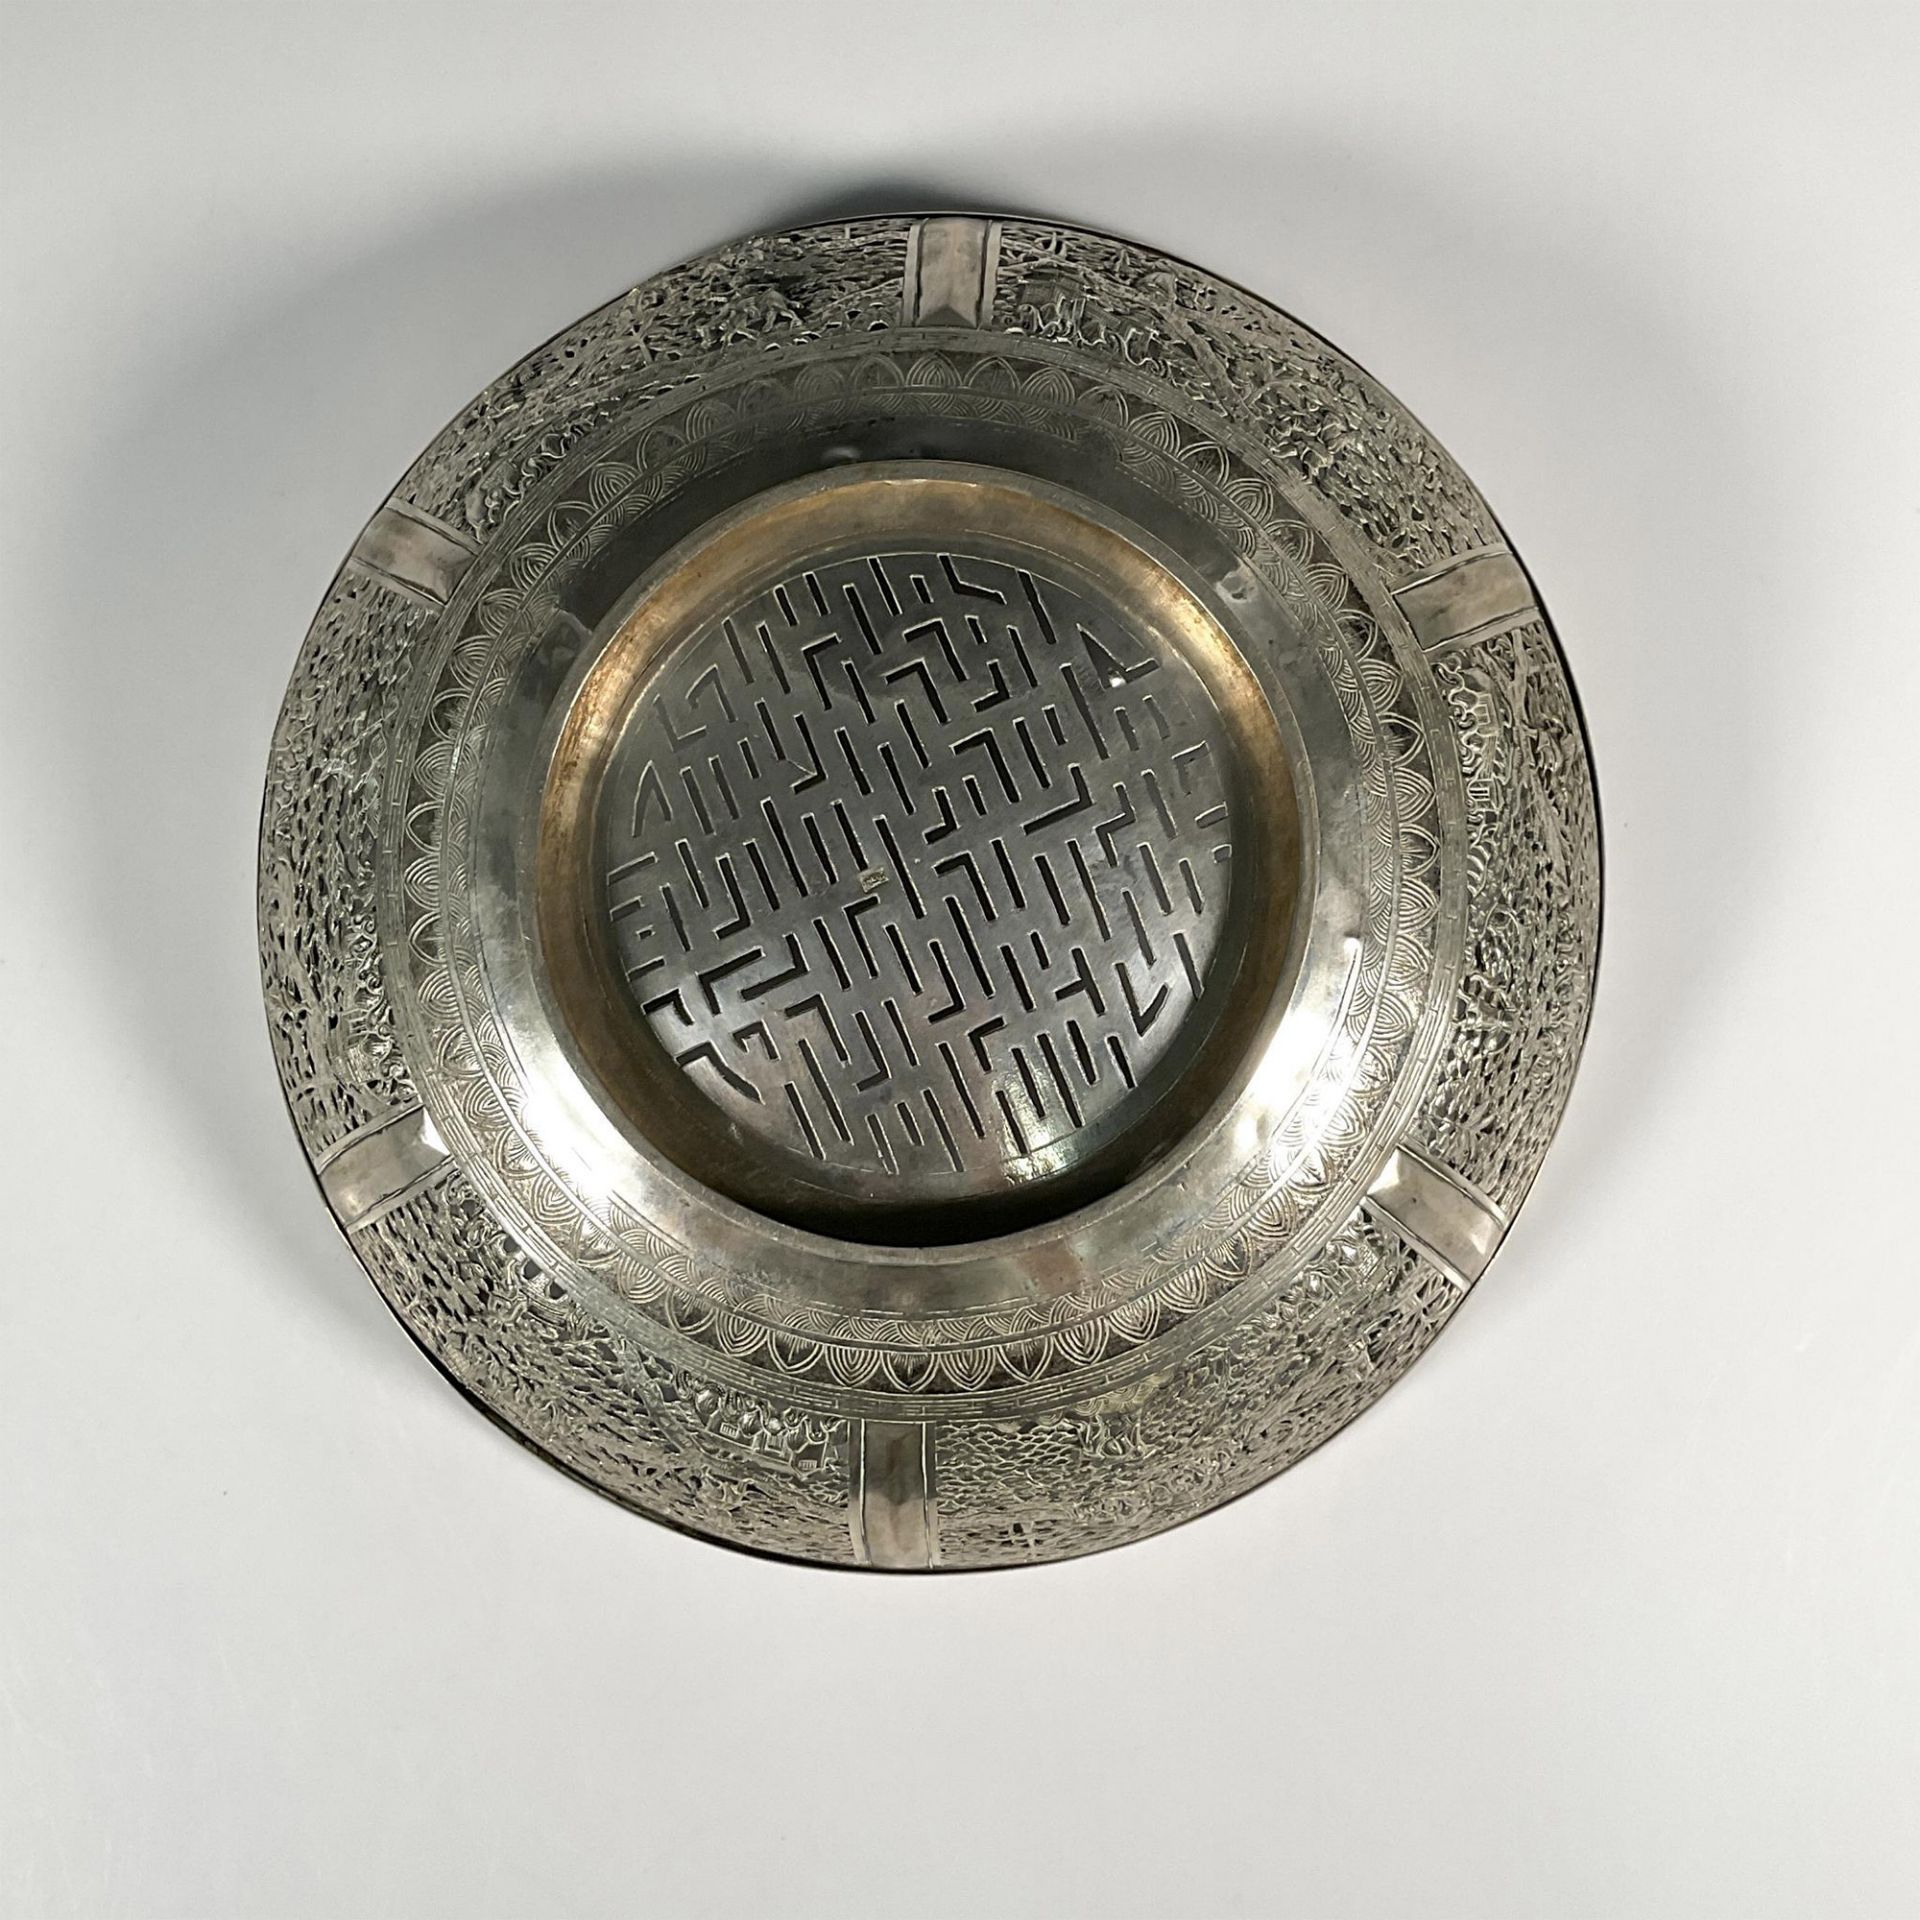 Asian Silver Decorative Pierced Bowl - Image 3 of 6